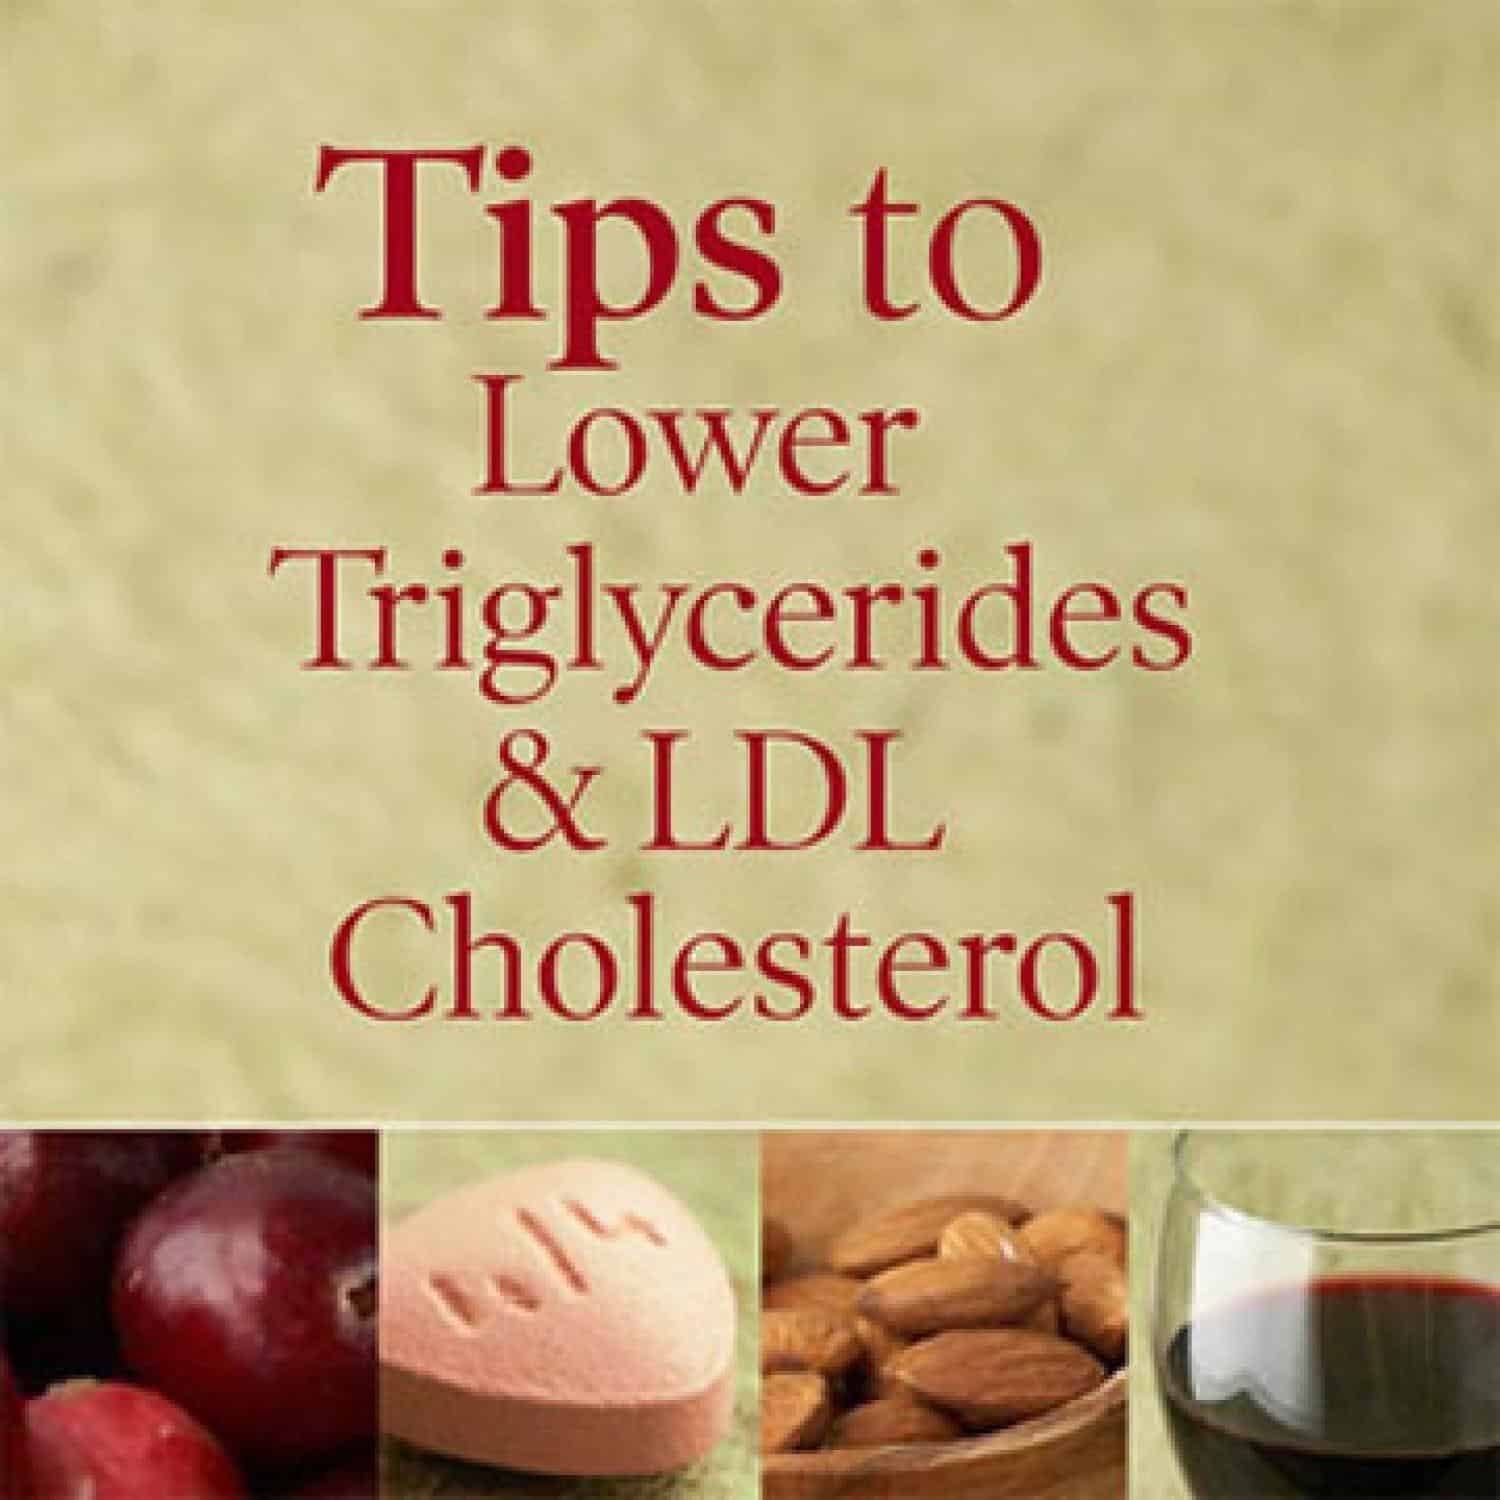 What To Eat To Lower Cholesterol And Blood Sugar